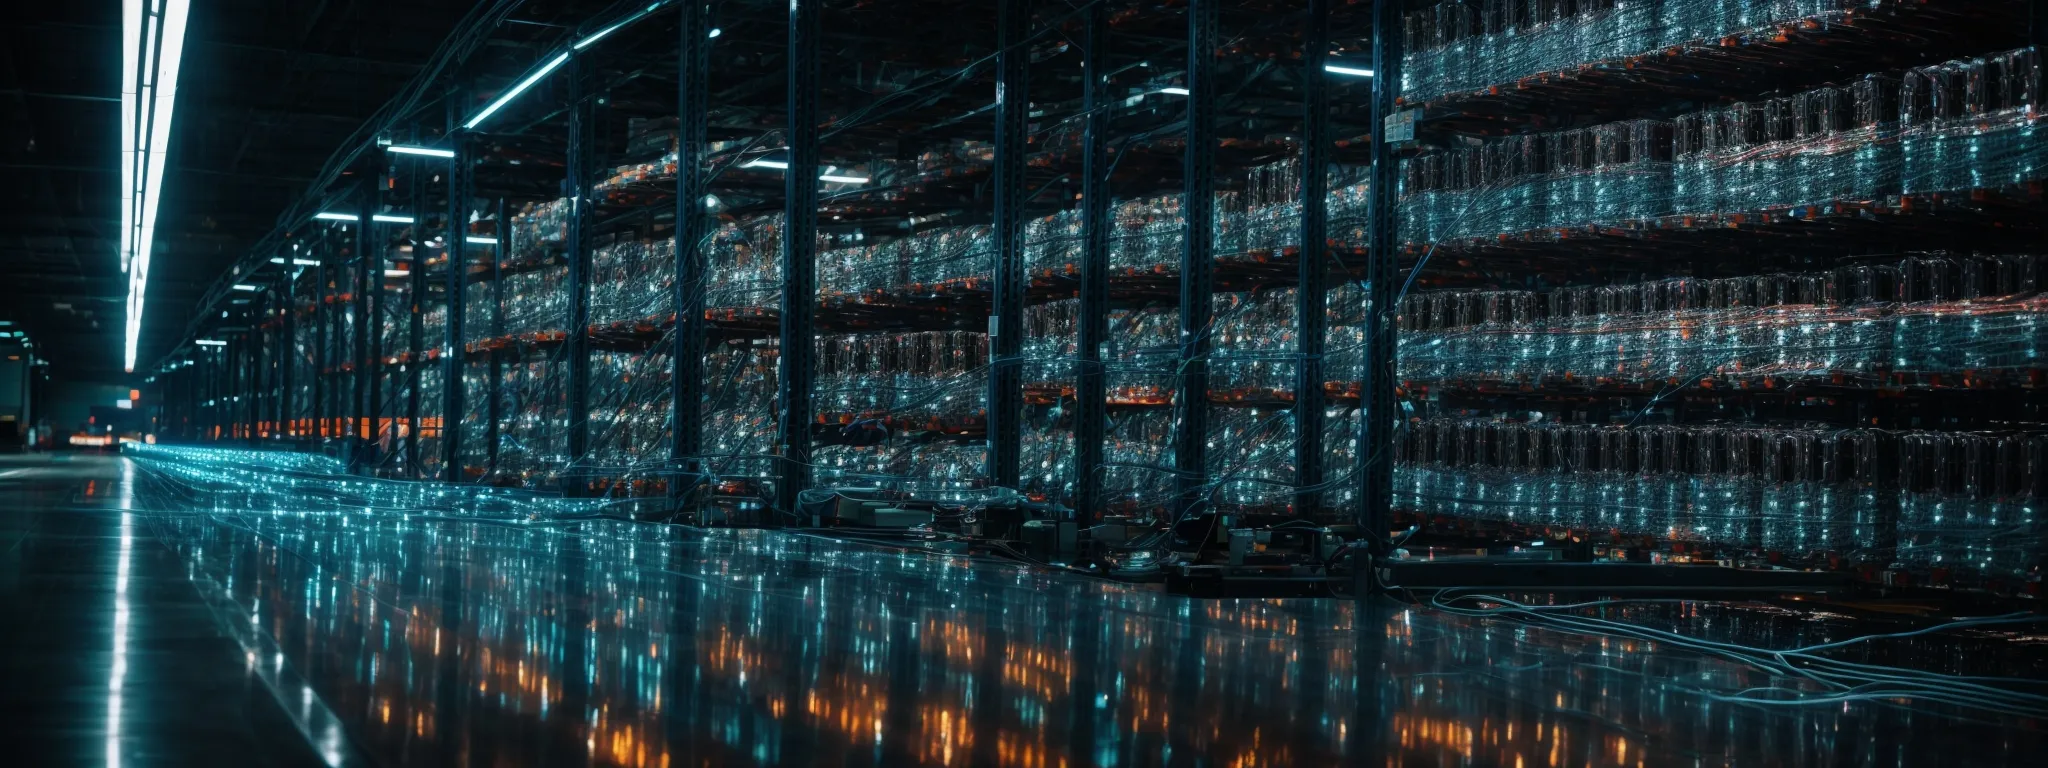 a bustling ecommerce warehouse with rows of servers and fiber optic cables reflecting a high-speed network infrastructure.